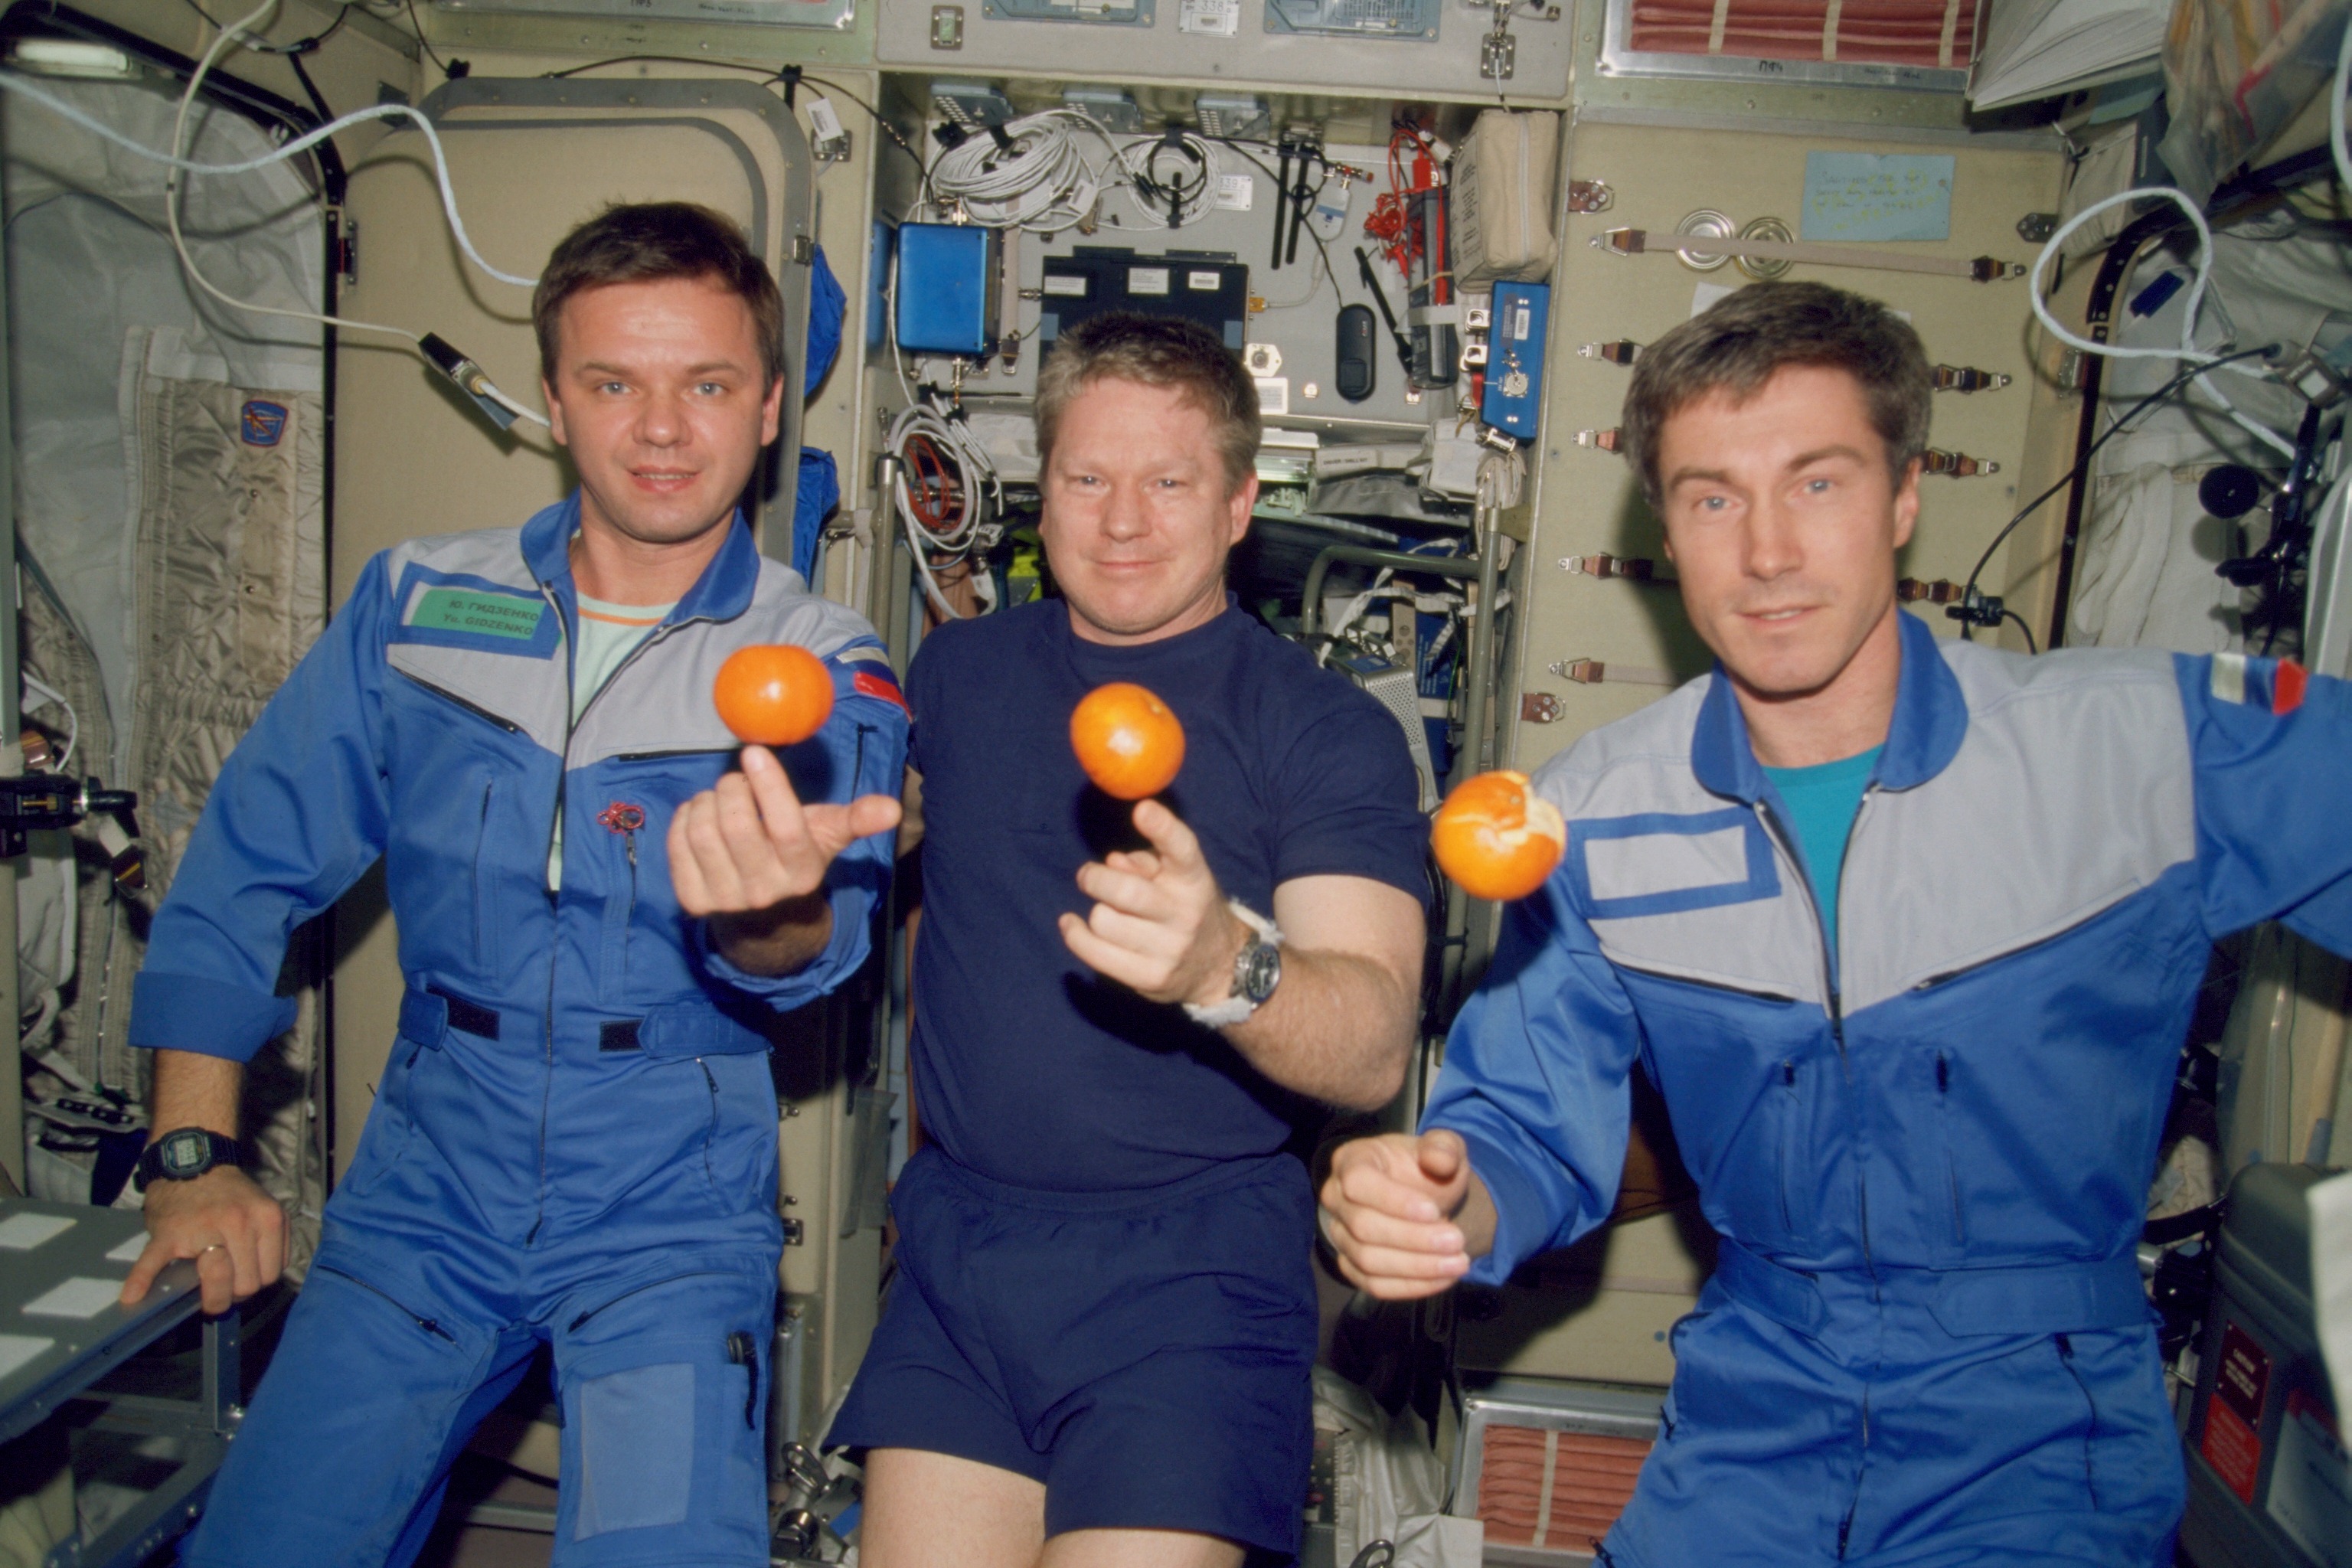 Bill Shepherd (center) and his Expedition 1 crewmates Yuri Gidzenko (left) and Sergei Krikalev juggle oranges during their time aboard the International Space Station. They celebrated both Christmas and the dawn of 2001 in orbit. Photo Credit: NASA